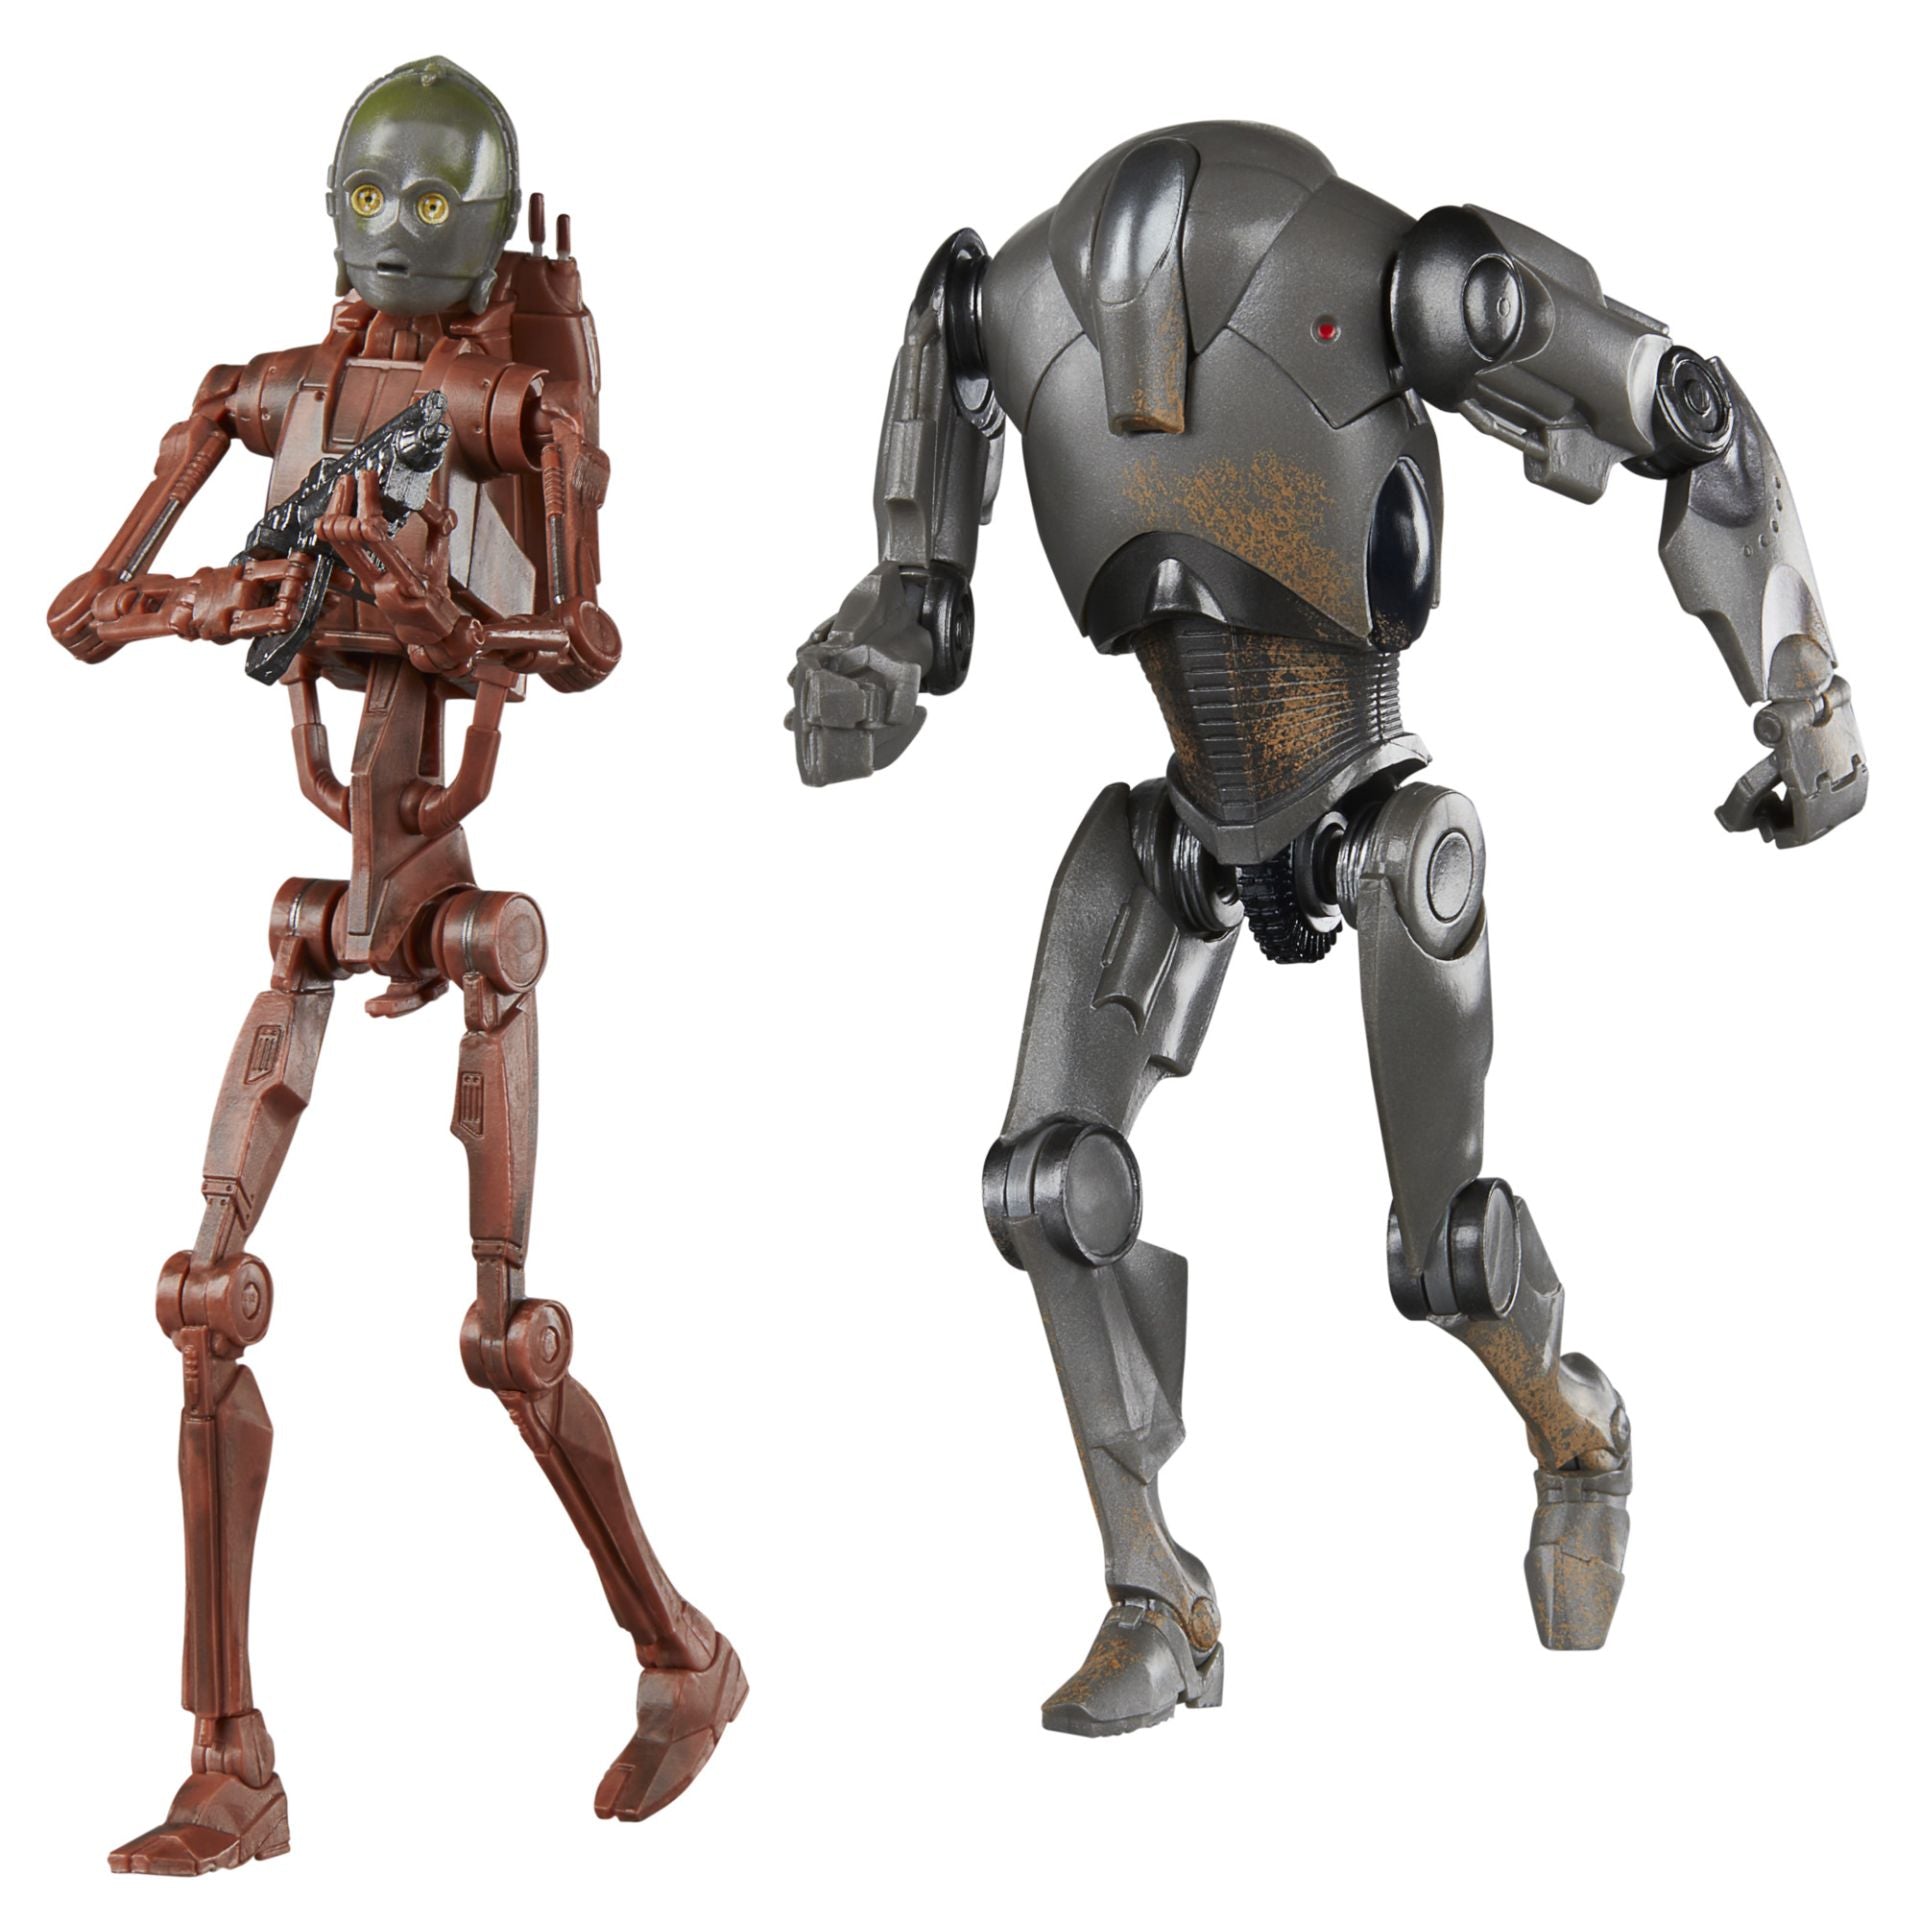 Star Wars Black Series 6" Attack of the Clones C-3PO & Super Battle Droid 2 Pack - 0